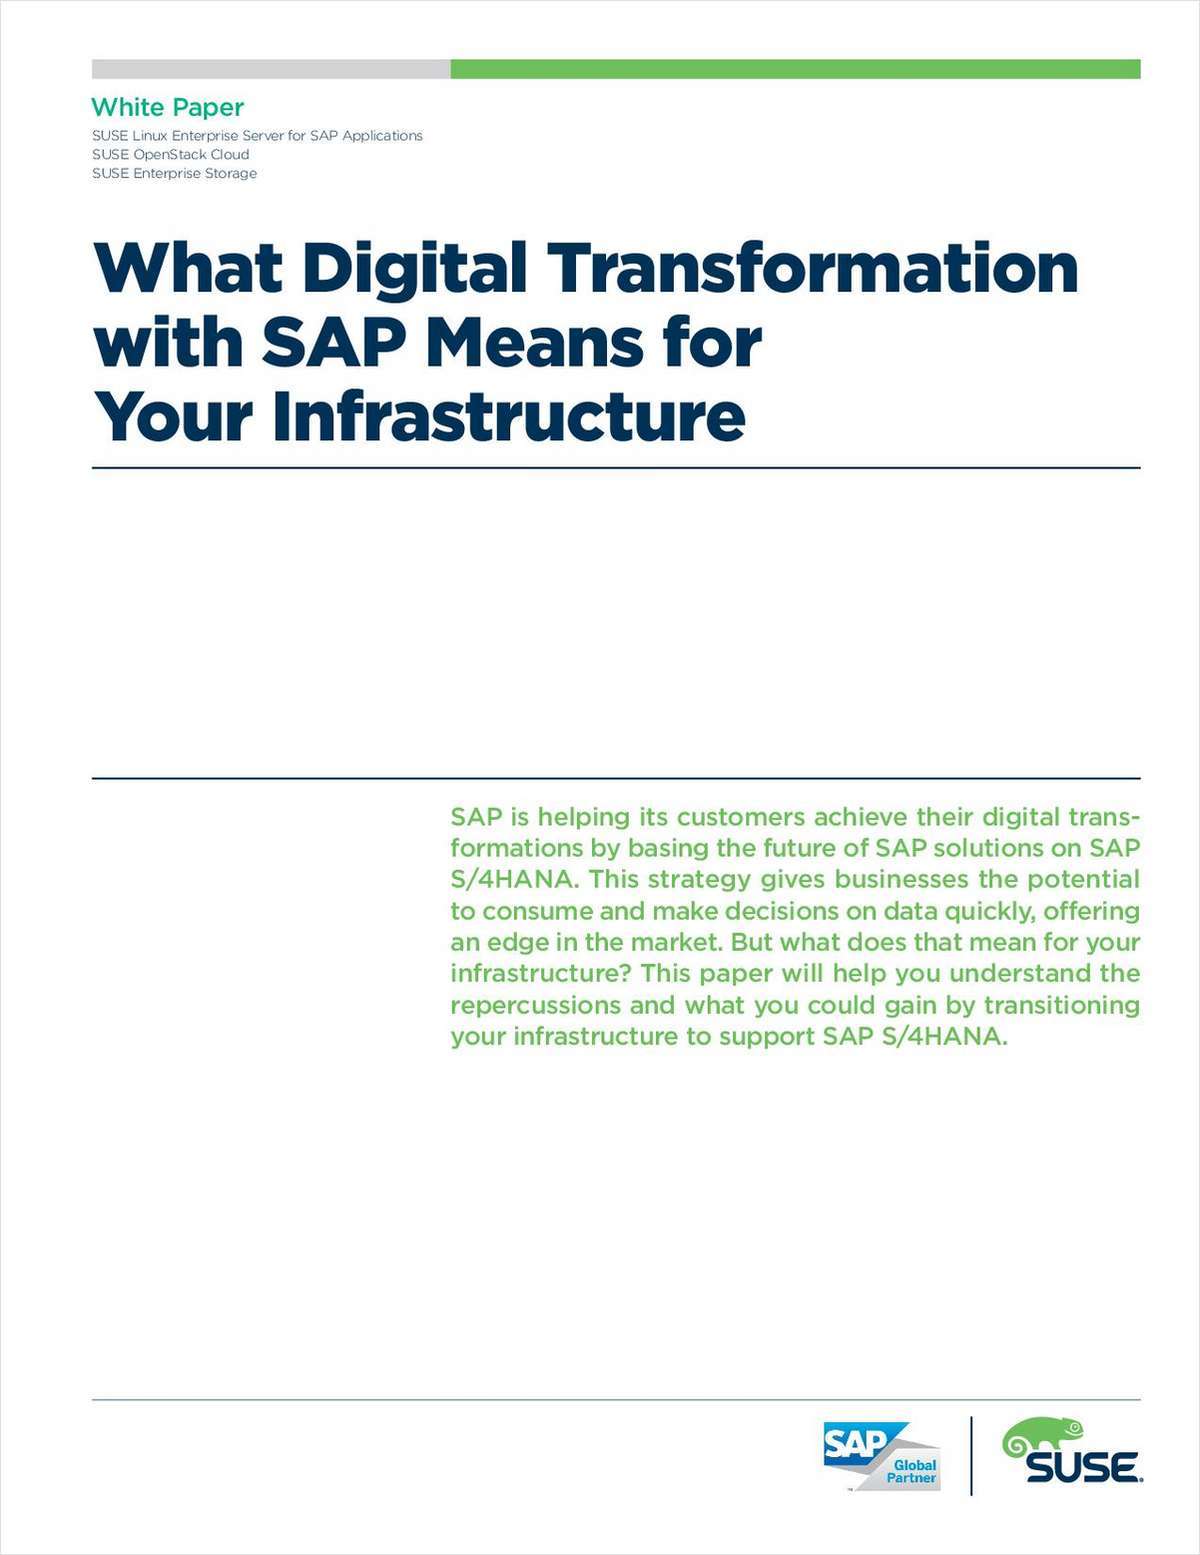 What Digital Transformation with SAP Means for Your Infrastructure